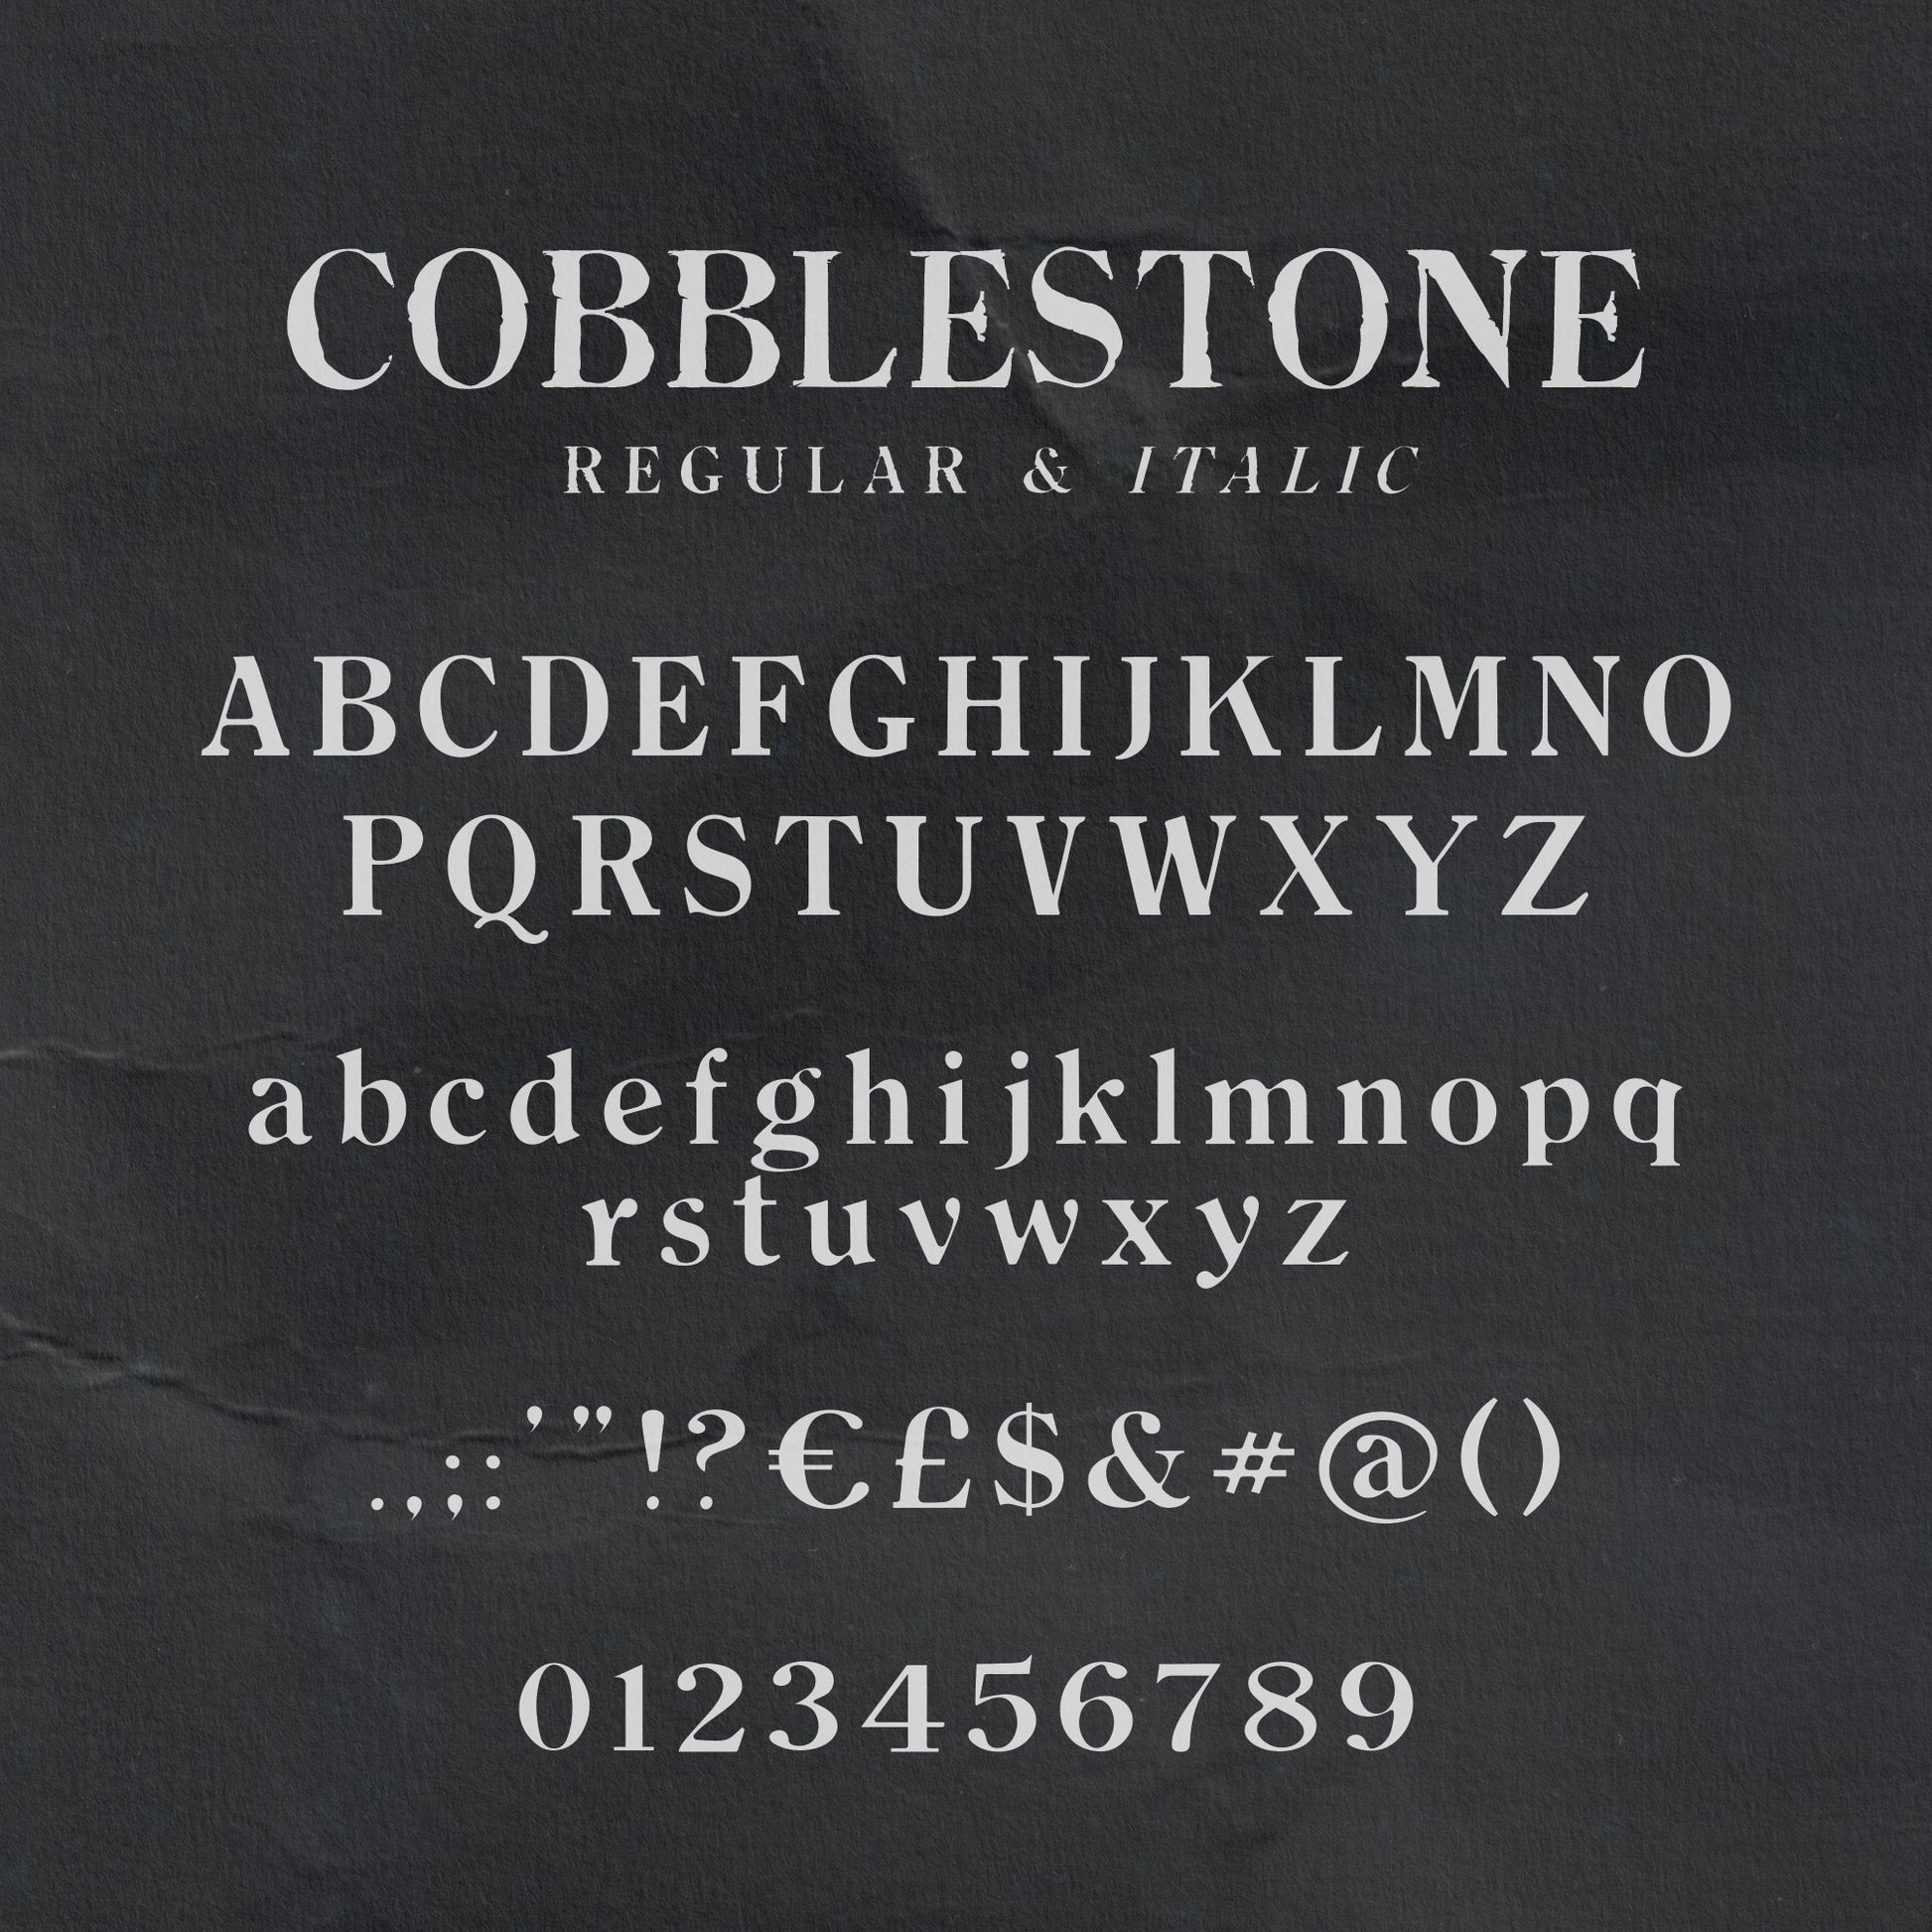 Dark background showing light colour letter samples from the Cobblestone font